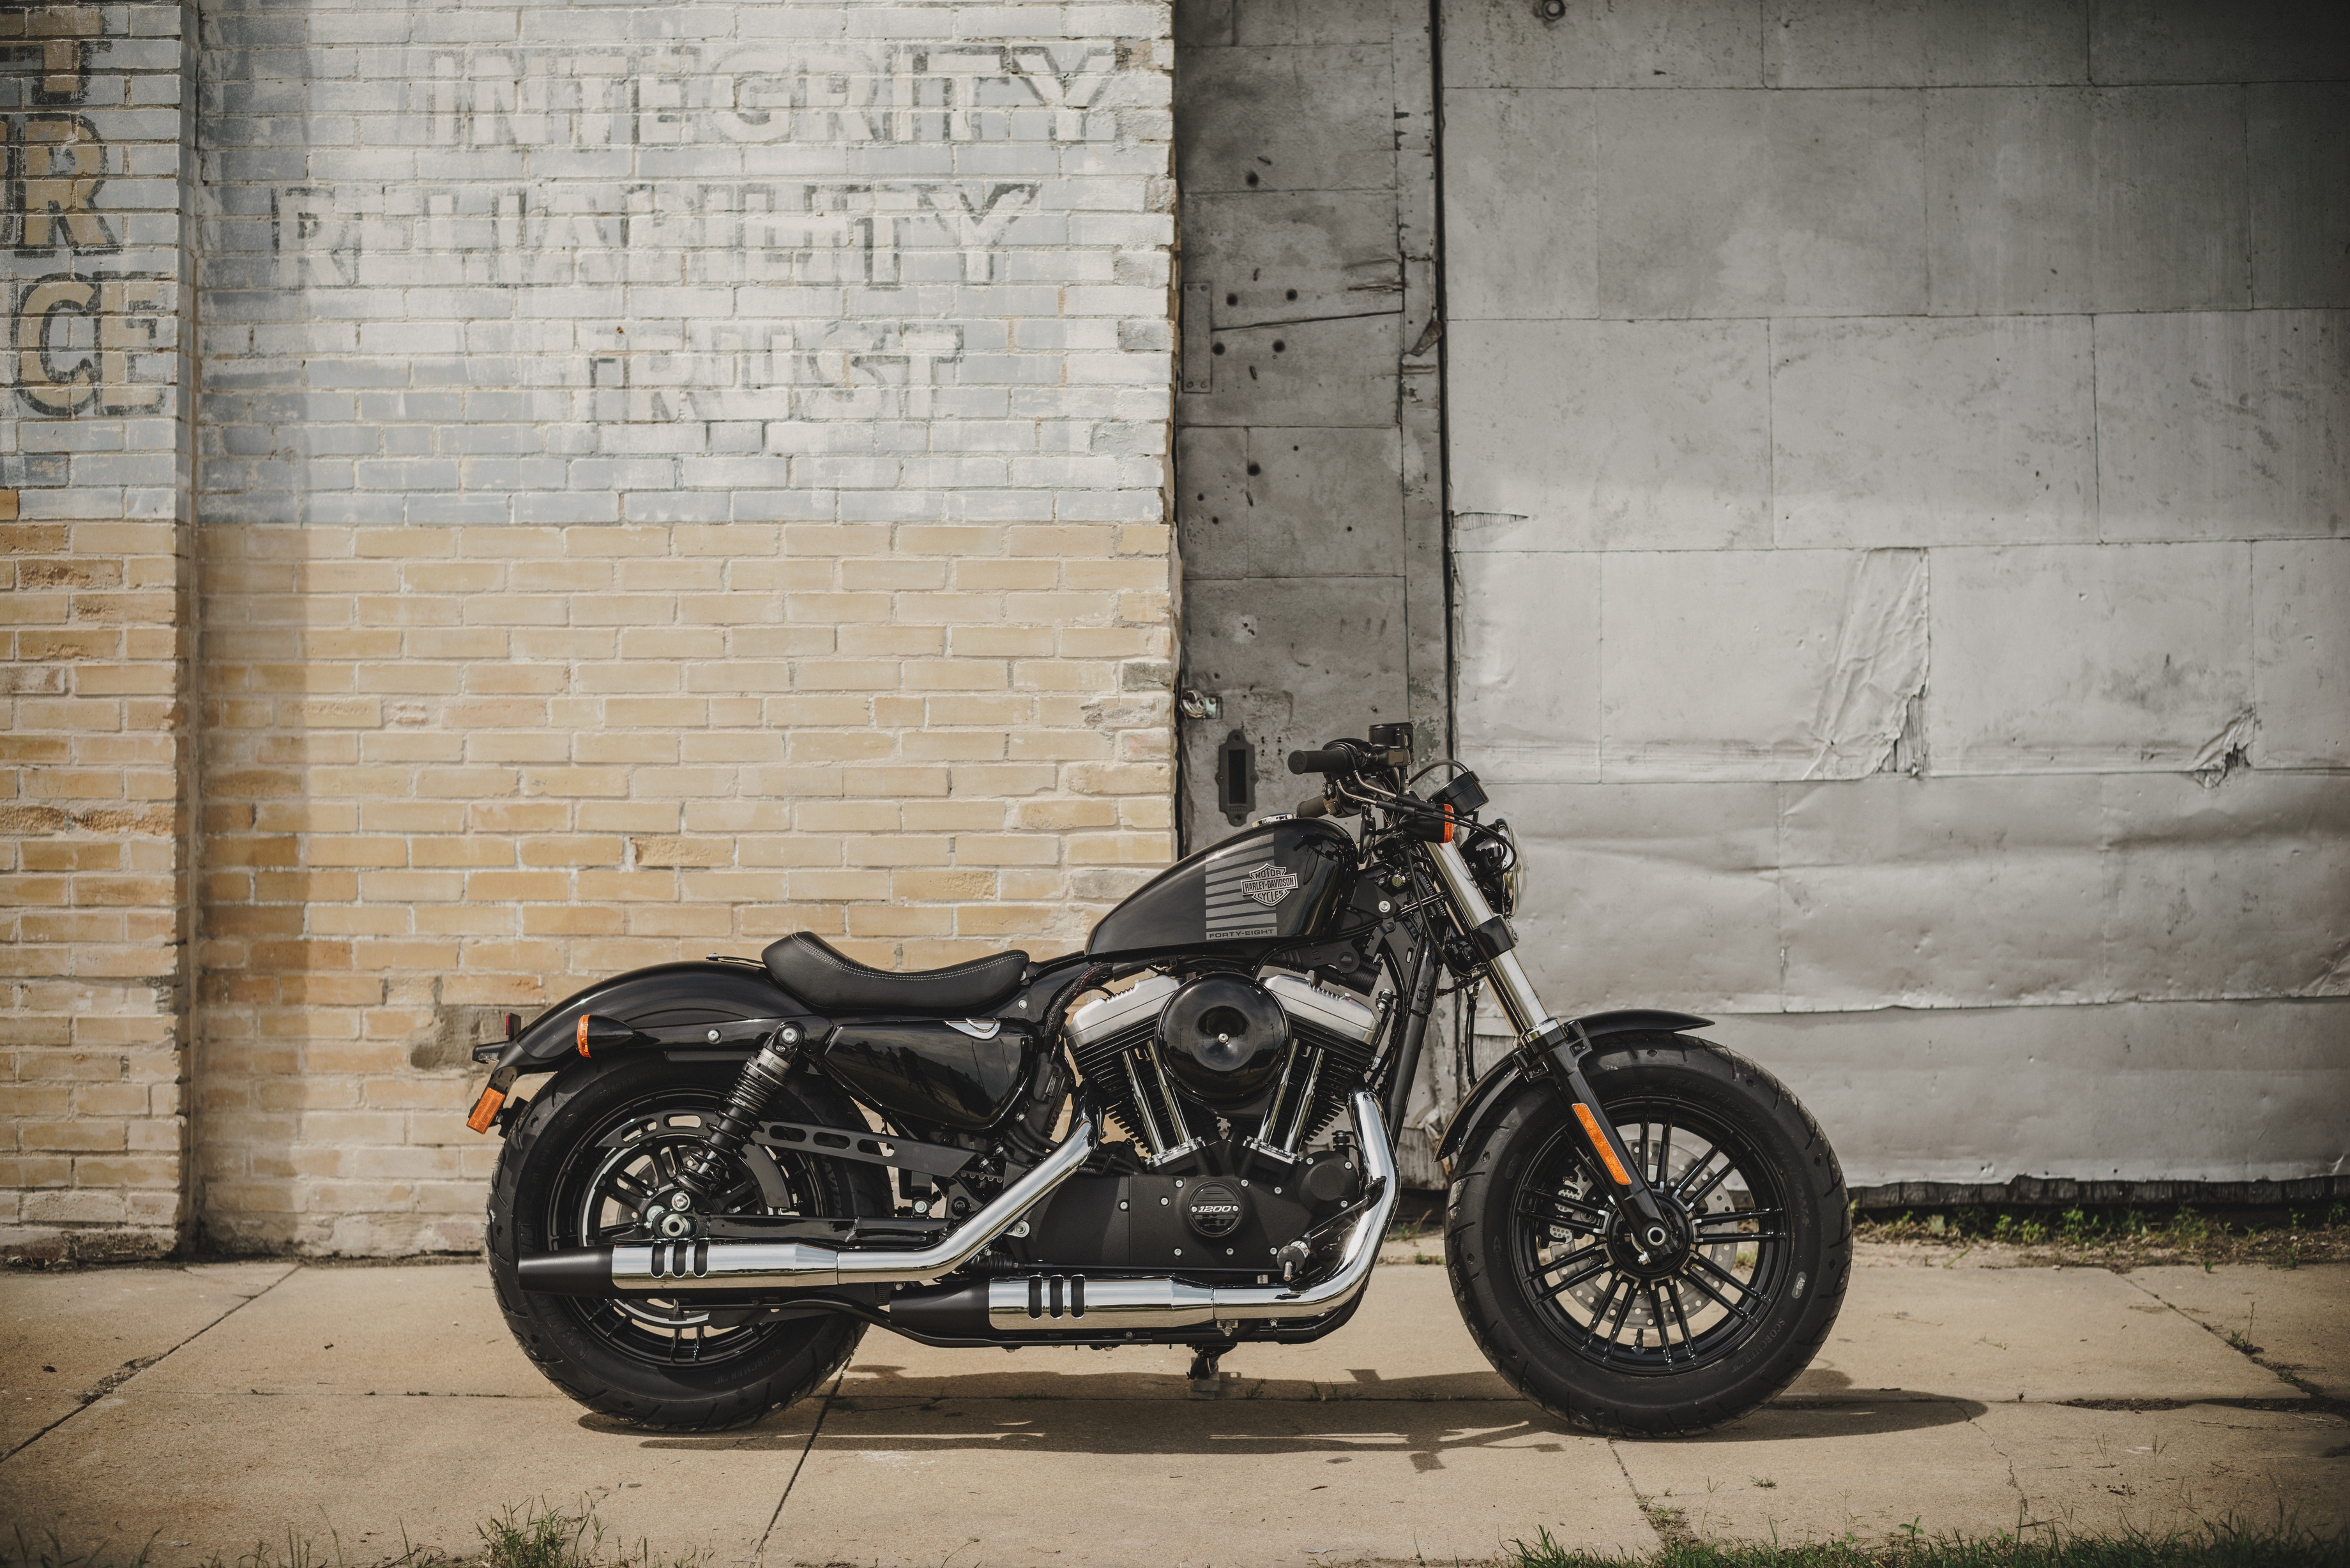 The 2016 Harley Davidson Forty-Eight Keeps You Off The Internet and Out Riding